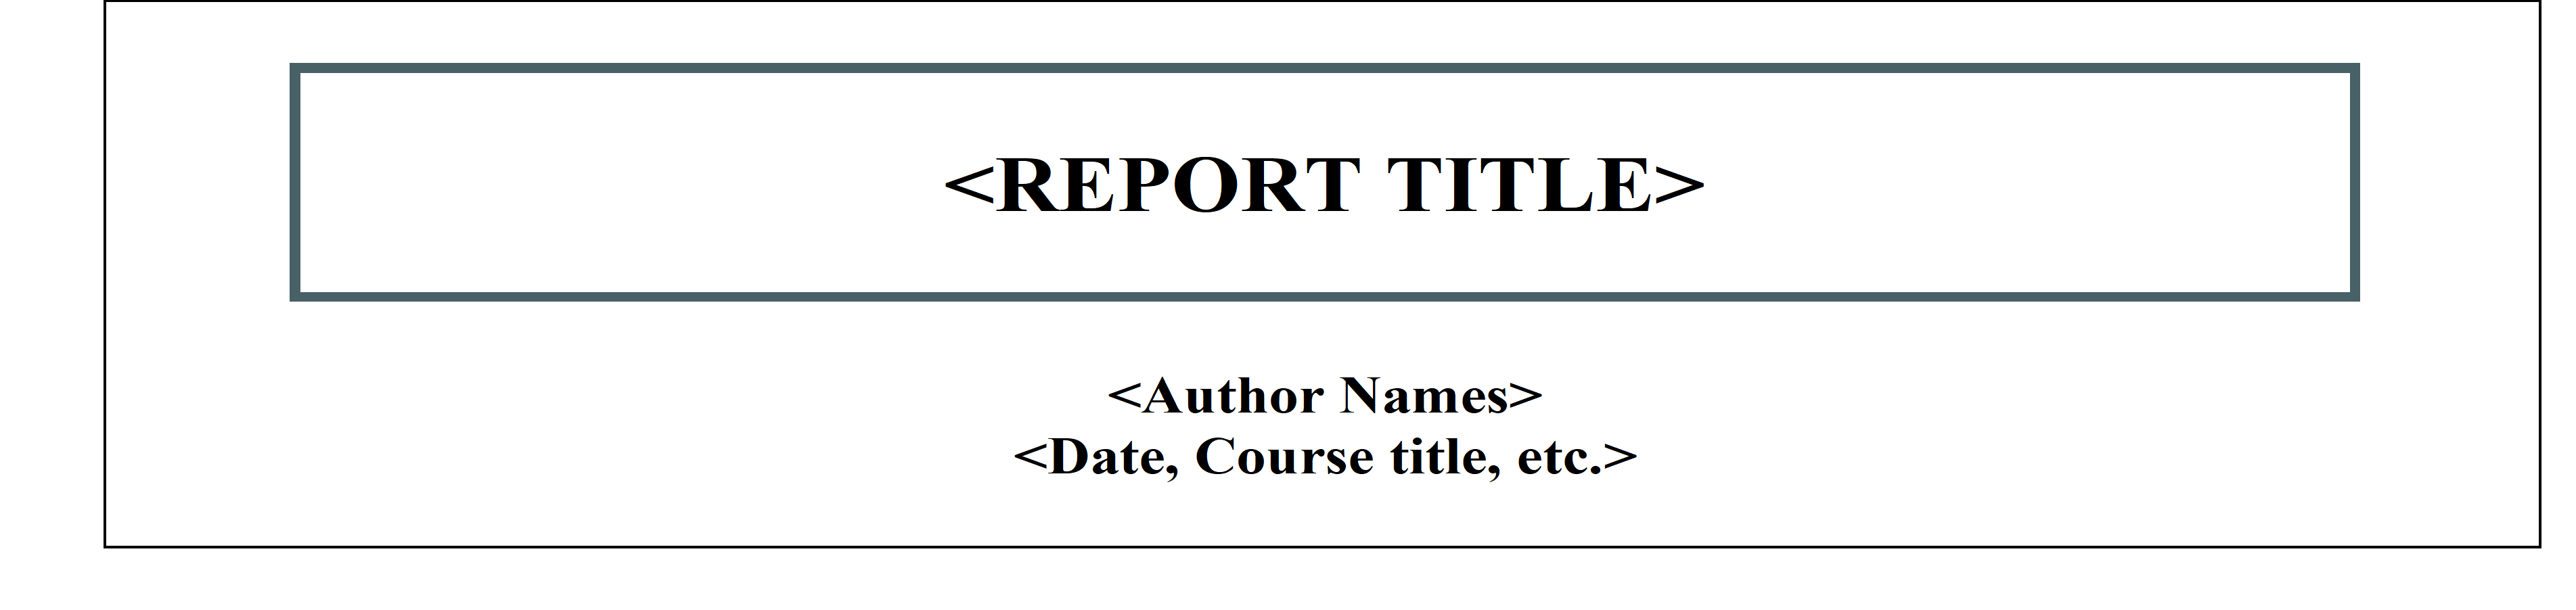 Example of a title page for a report. Must include author names and report title